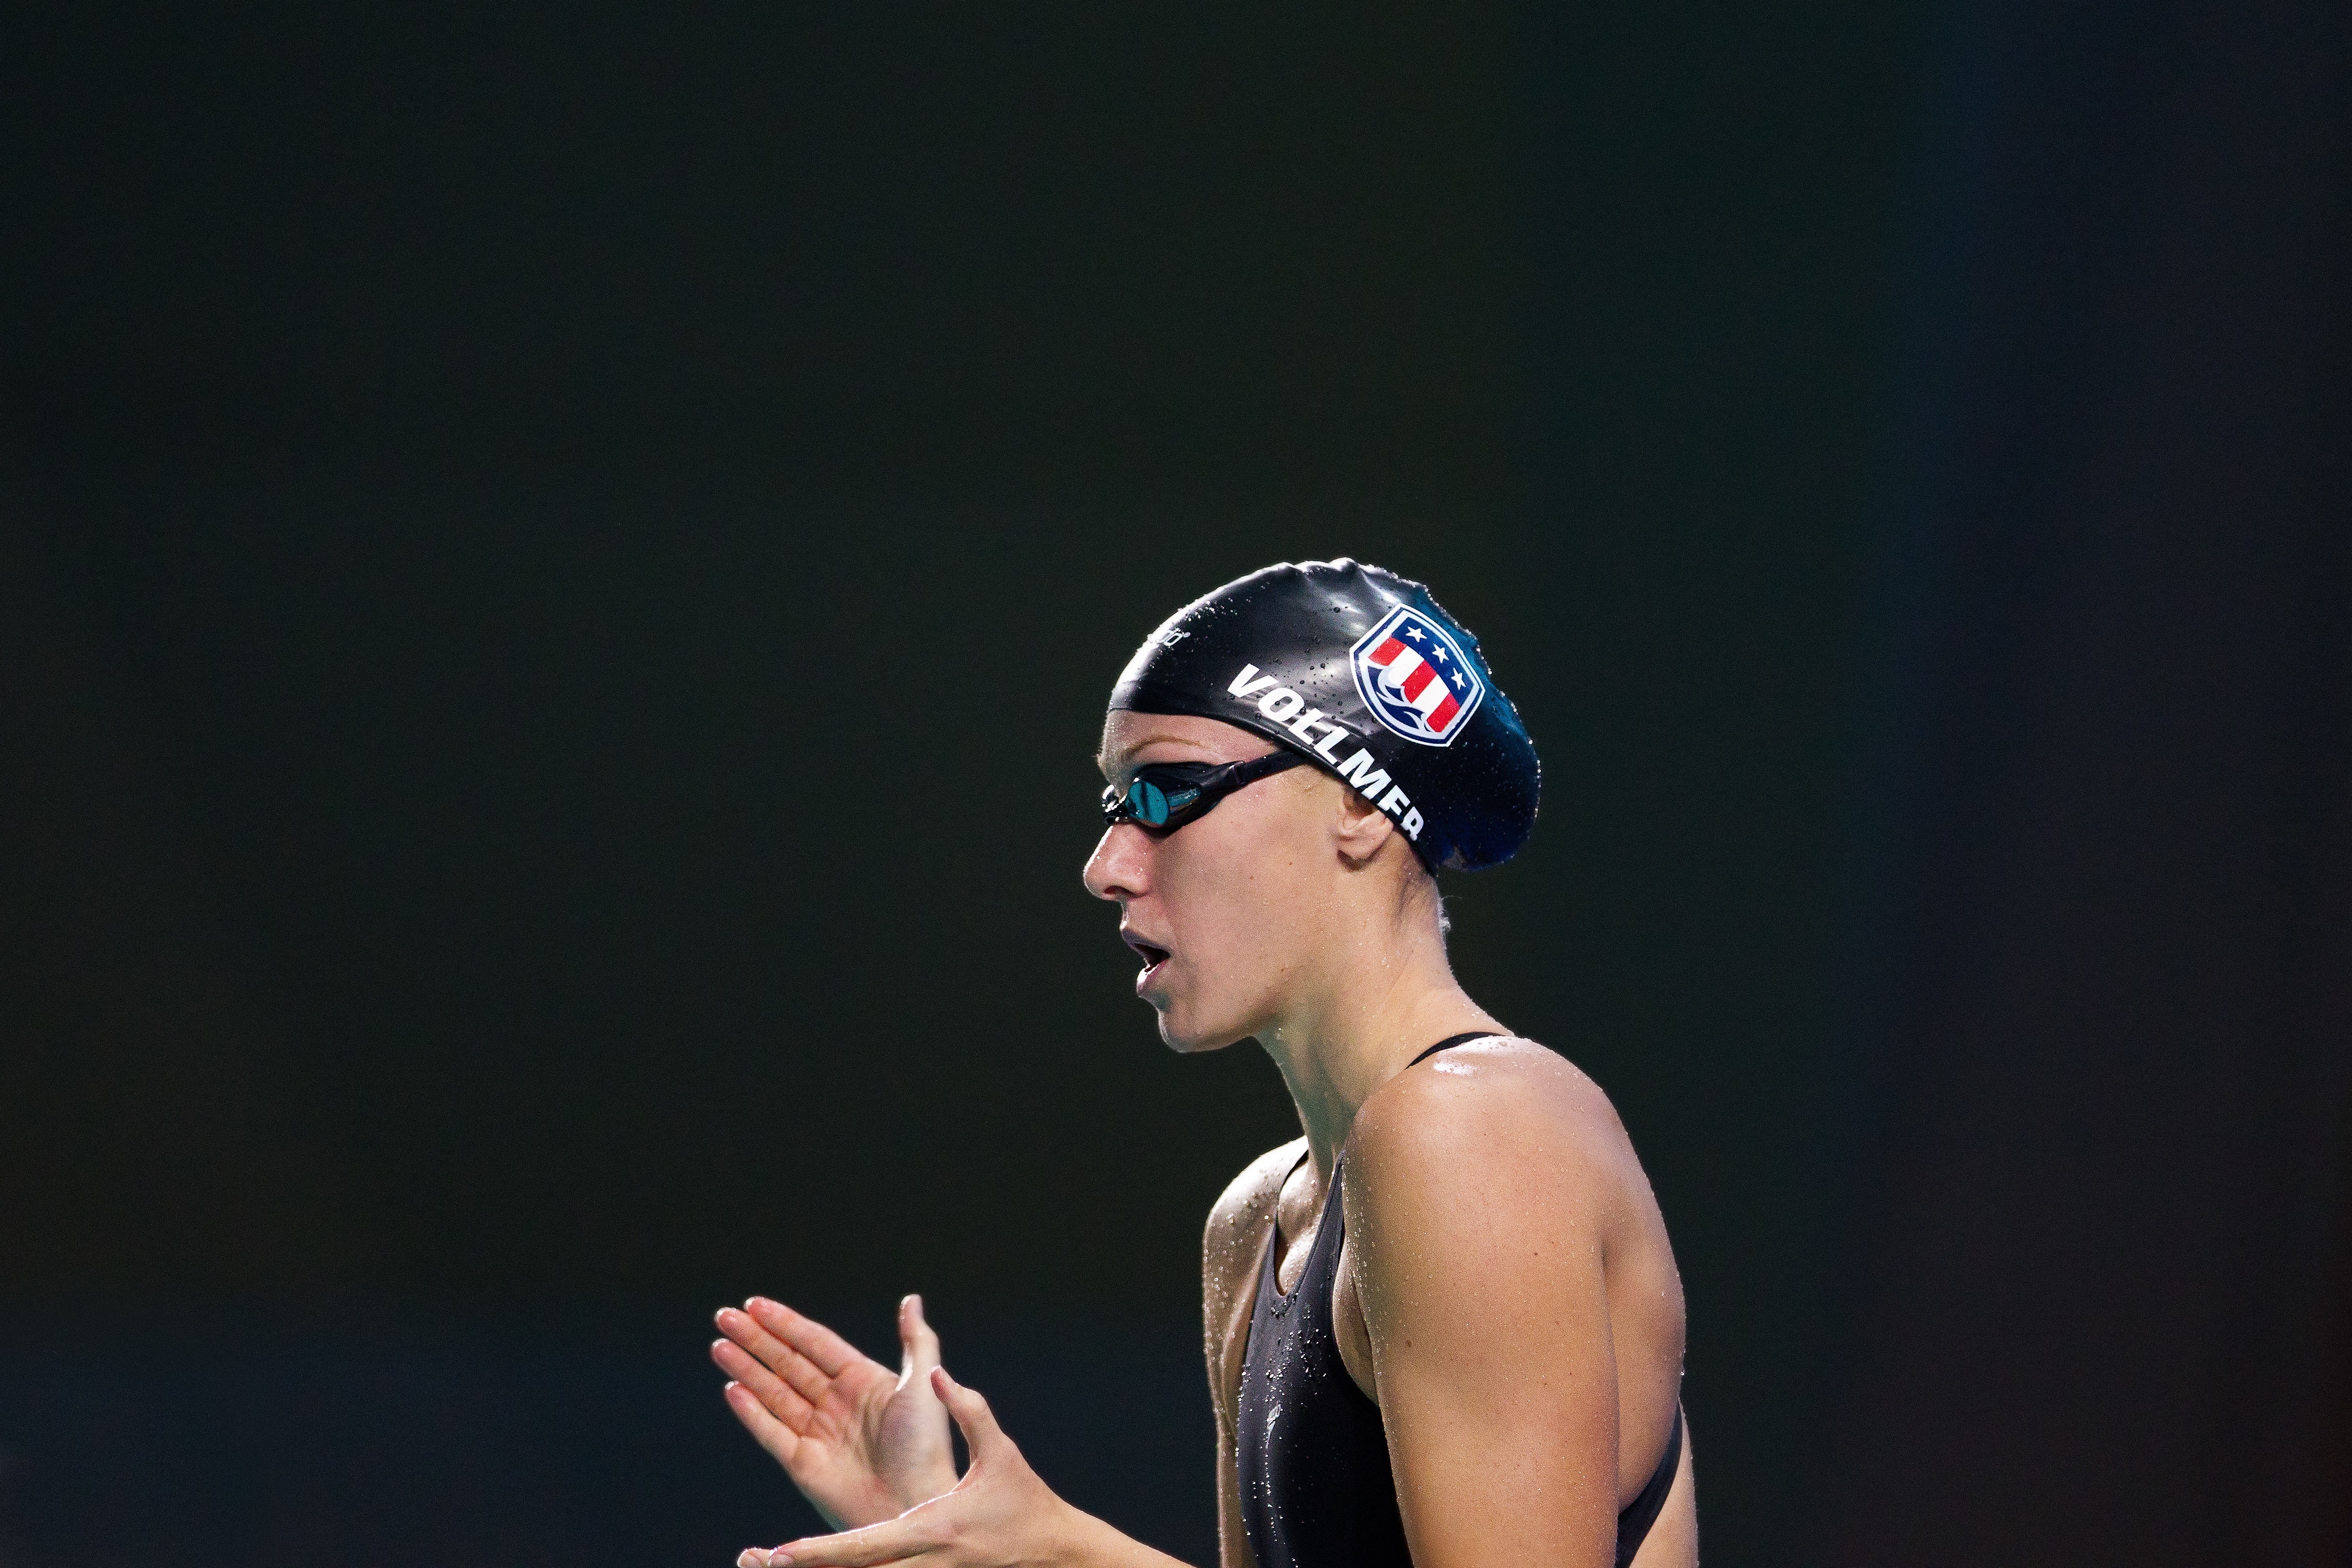 The Swimmer's Guide to Developing Unstoppable Momentum